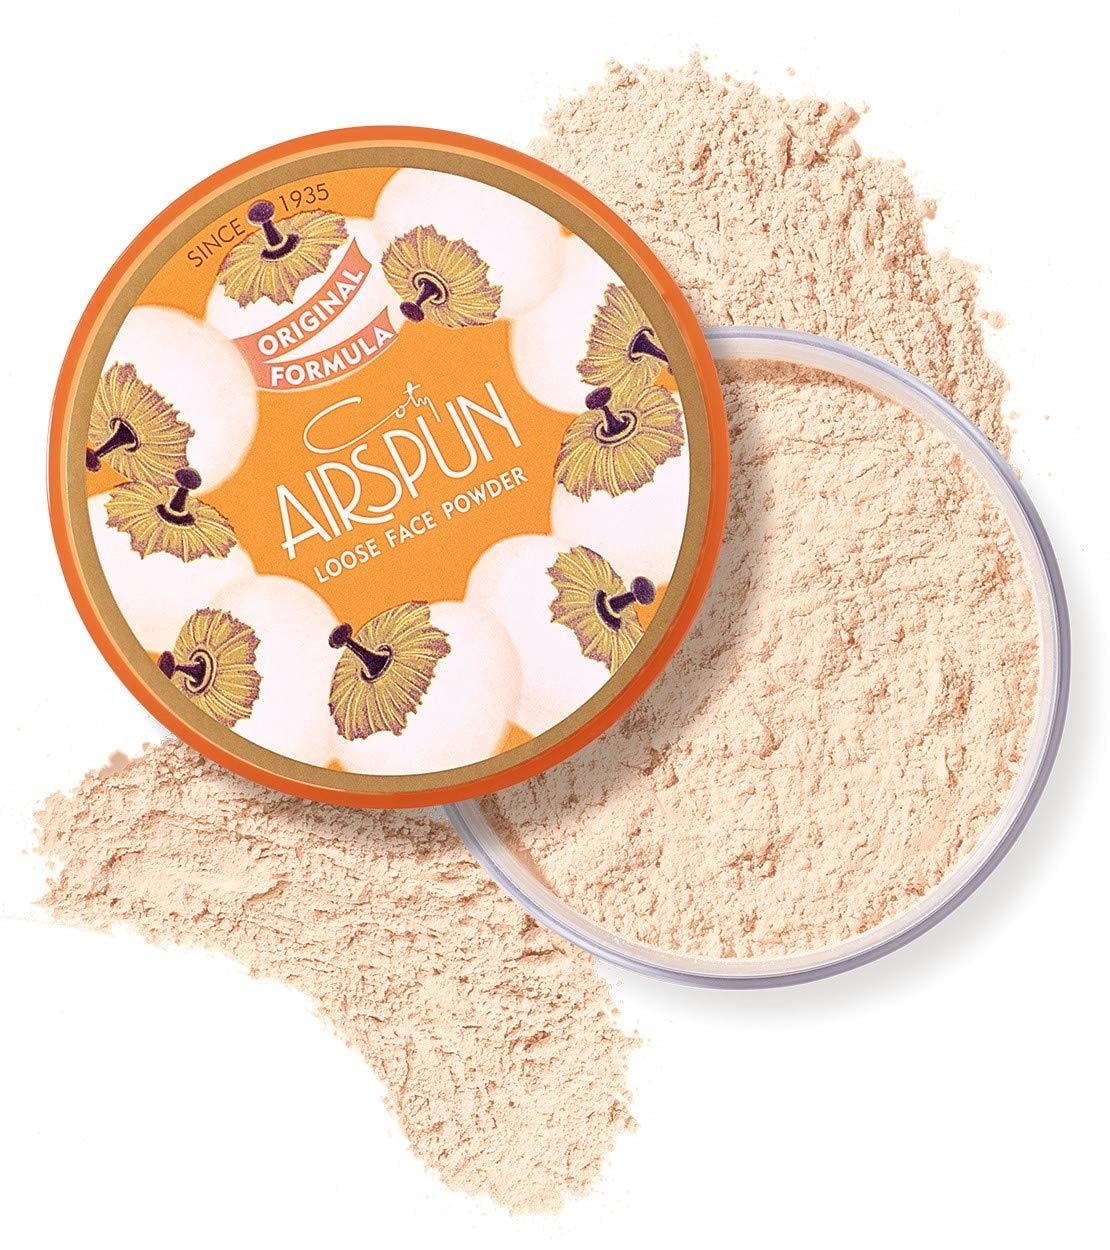 Coty Airspun Loose Face Powder 2.3 oz. Translucent Tone Loose Face for Makeup or as Foundation, Lightweight, Lasting,Pack of 1 Pack of 1 - Walmart.com